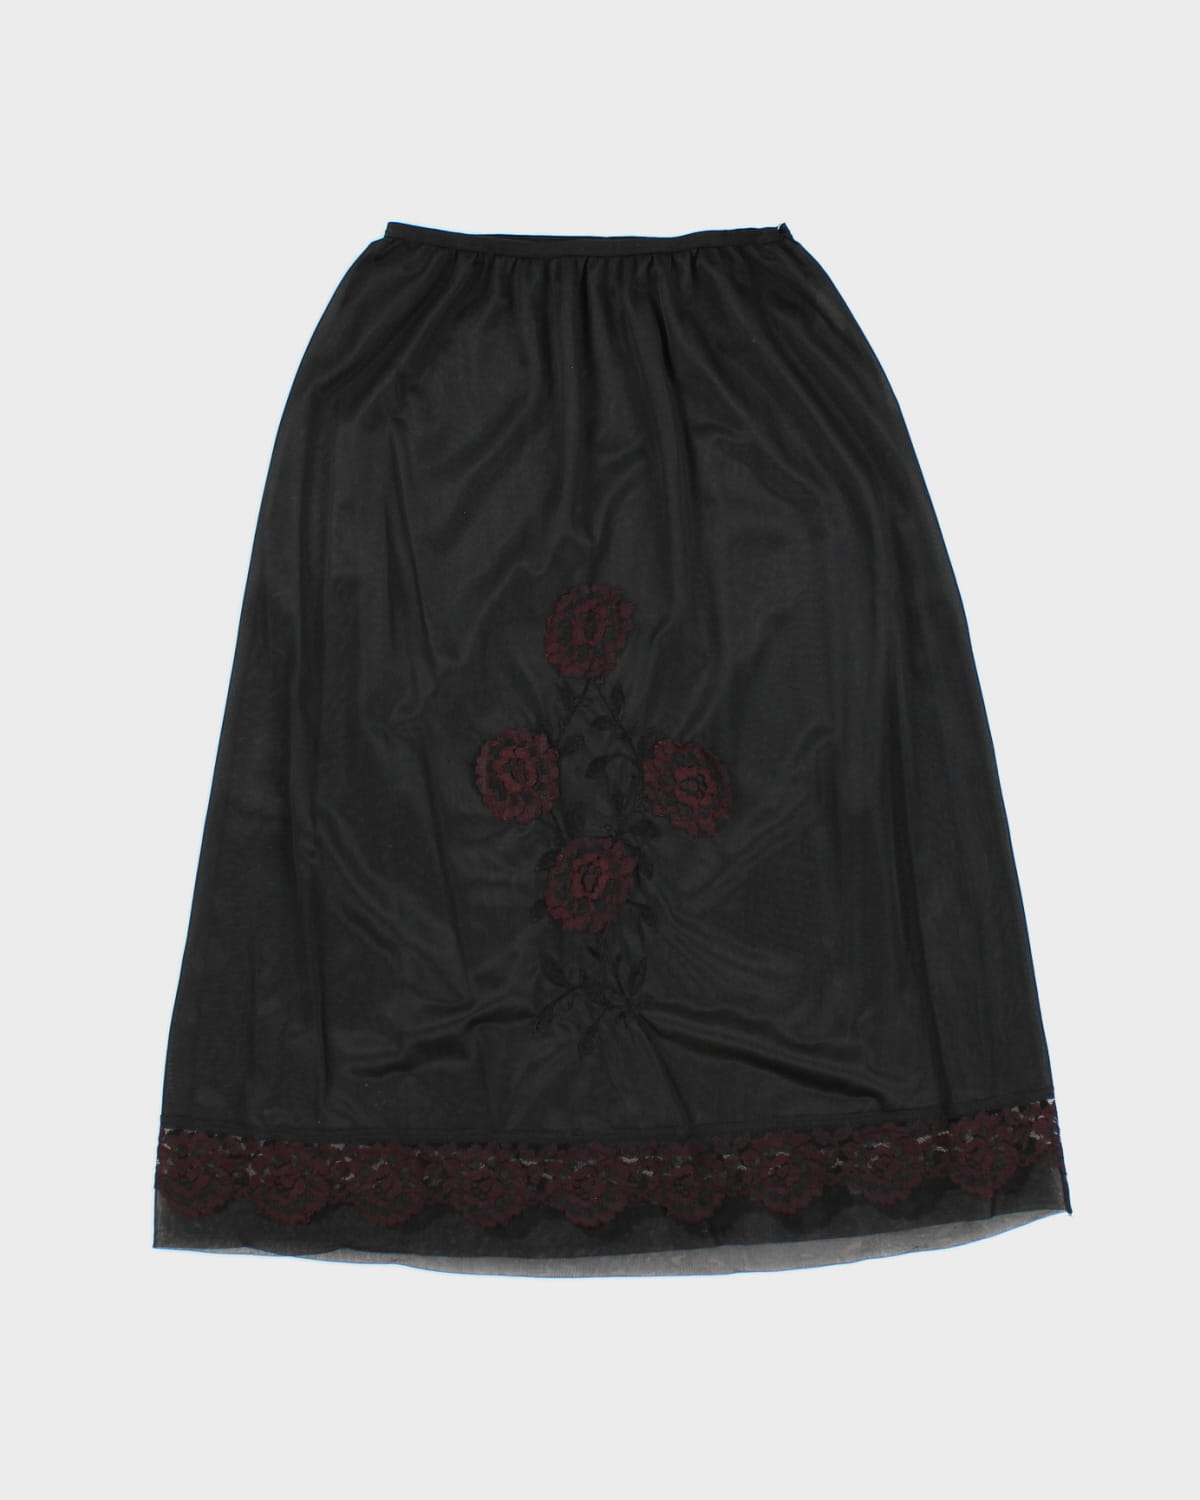 Vintage Lace Flower Embroidered Petticoat Slip Skirt - S